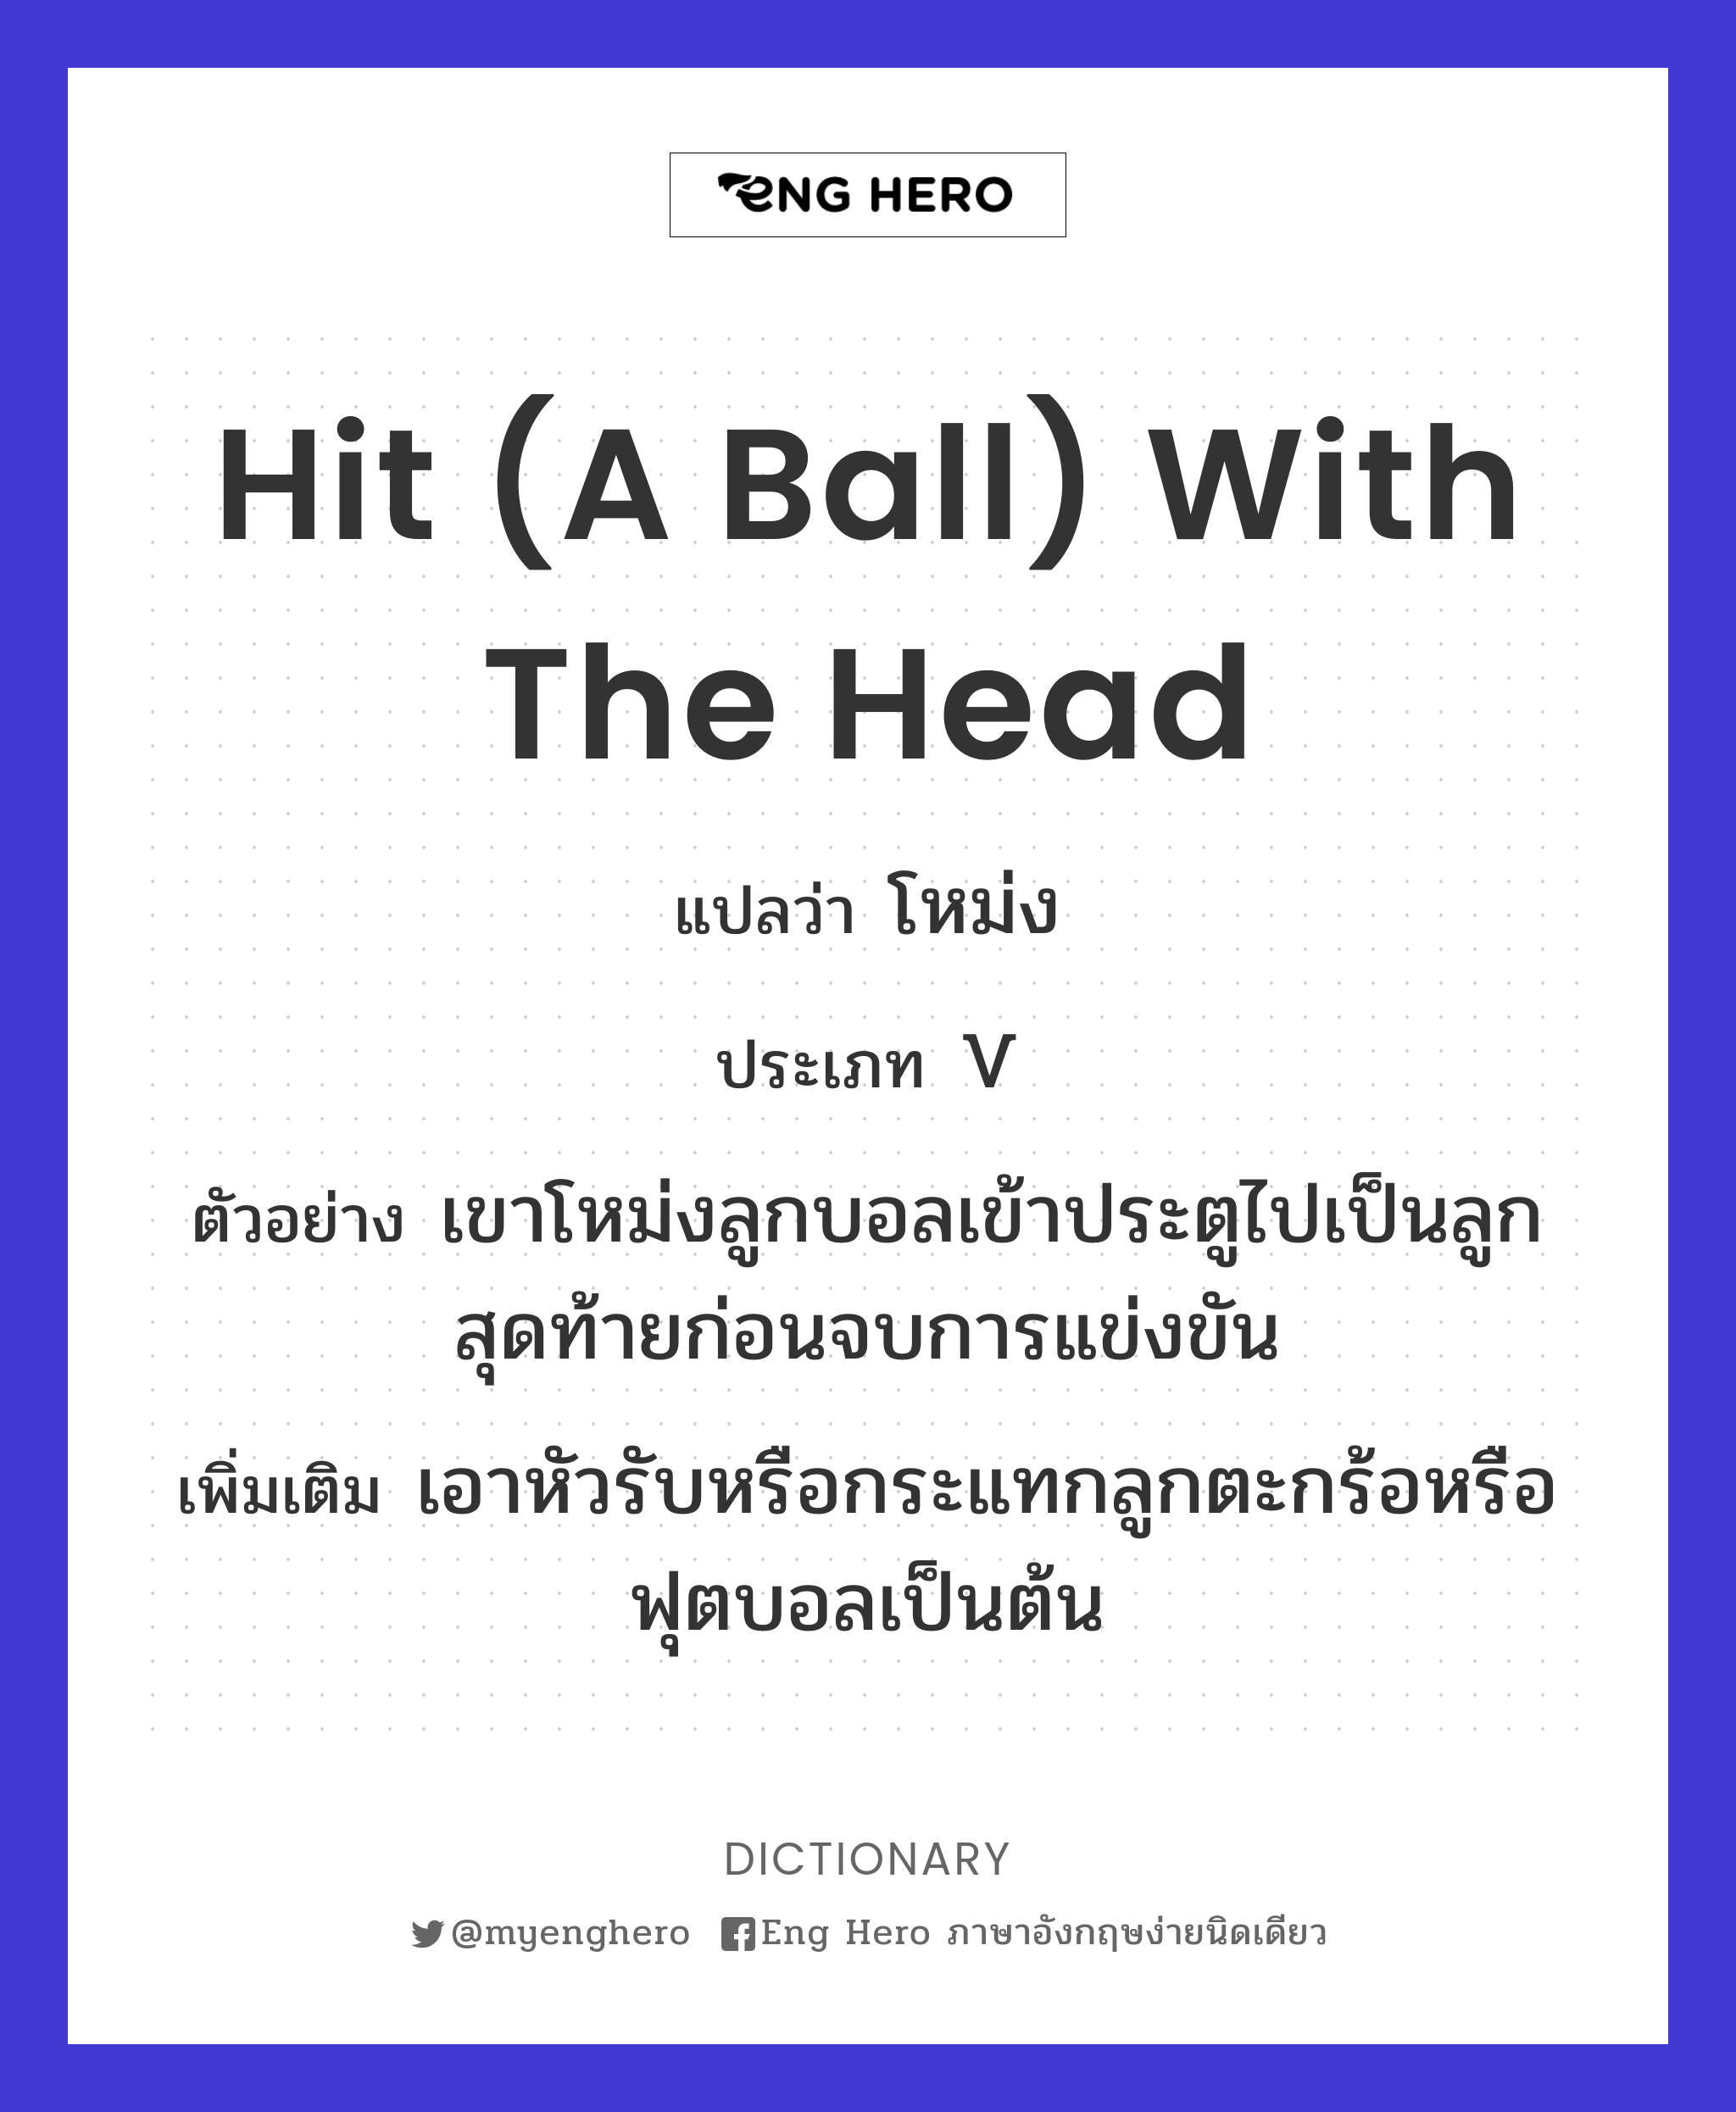 hit (a ball) with the head